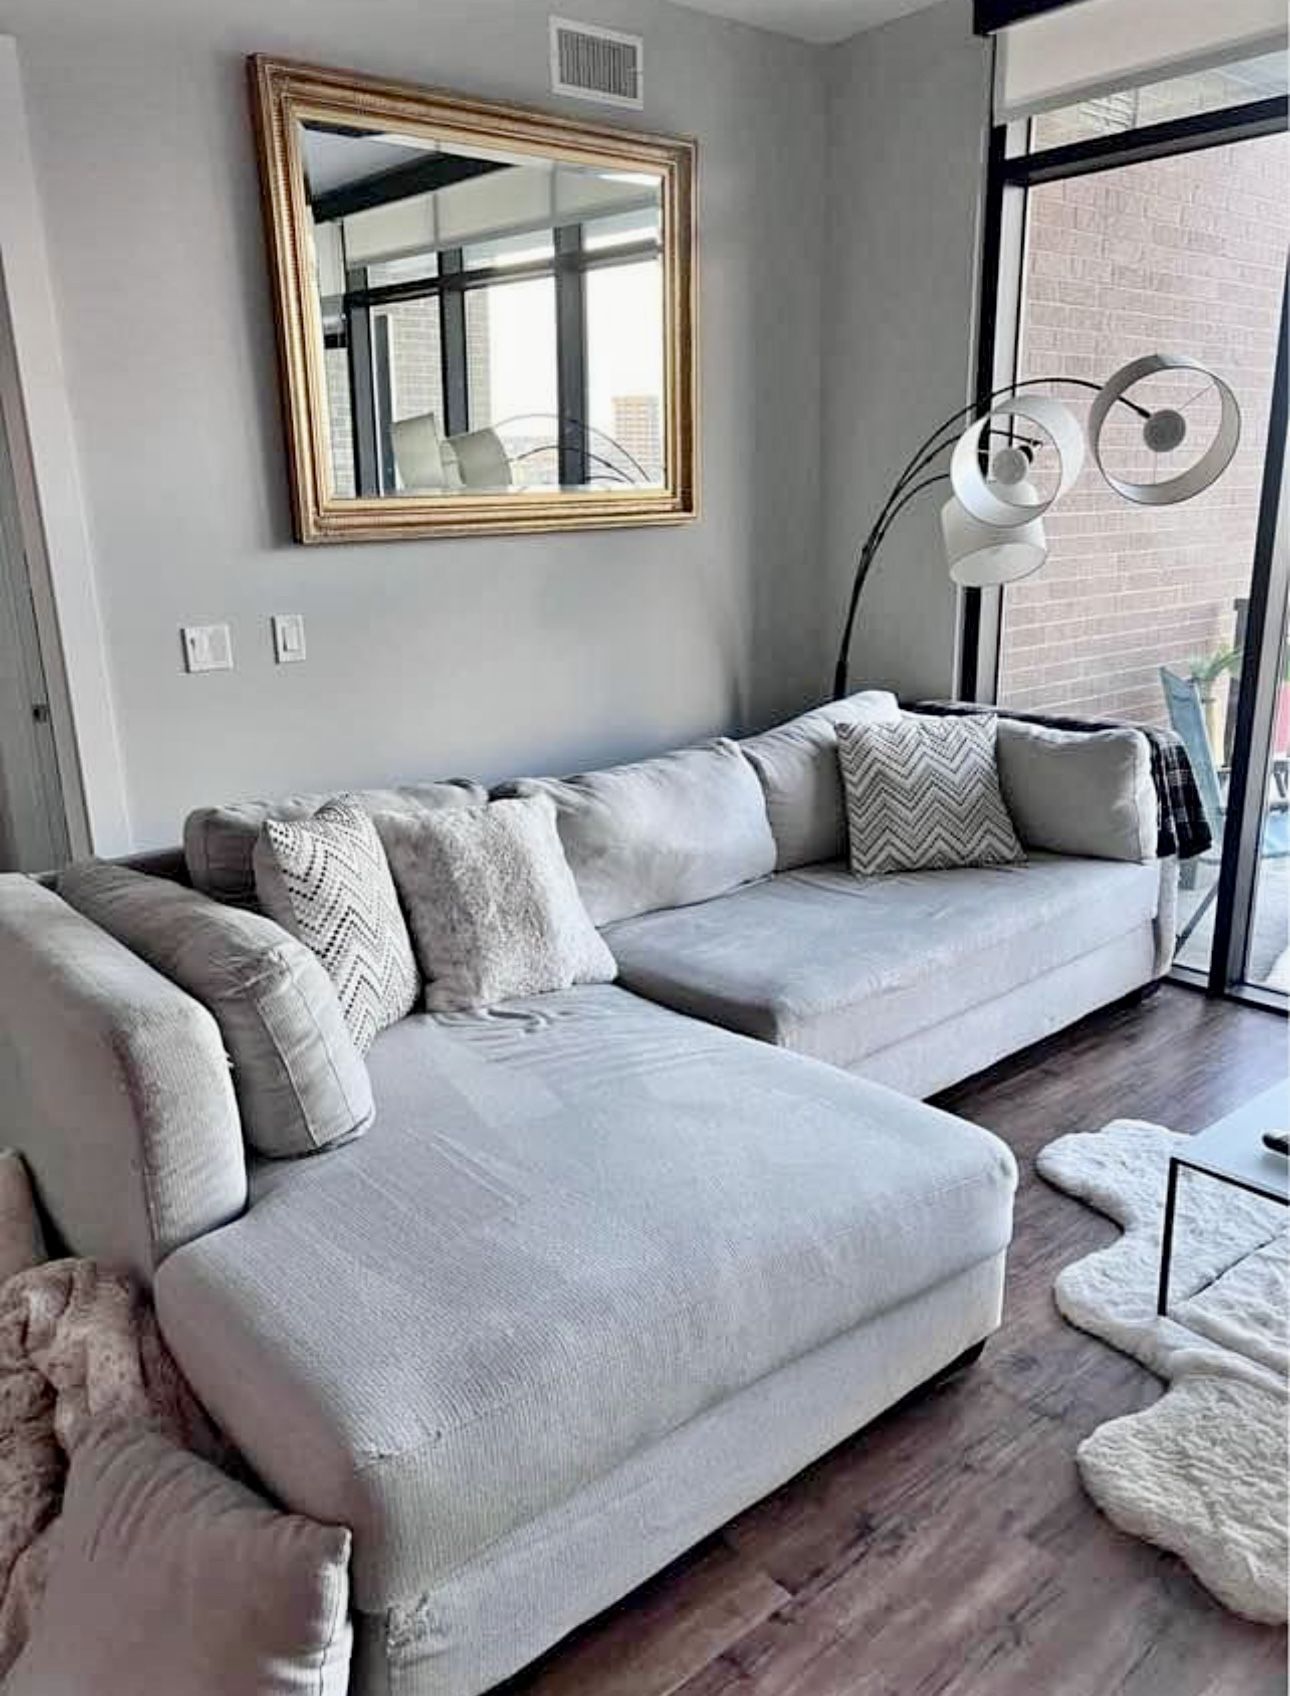 🚚 FREE DELIVERY ! Beautiful White Sectional Sofa w/ Chaise